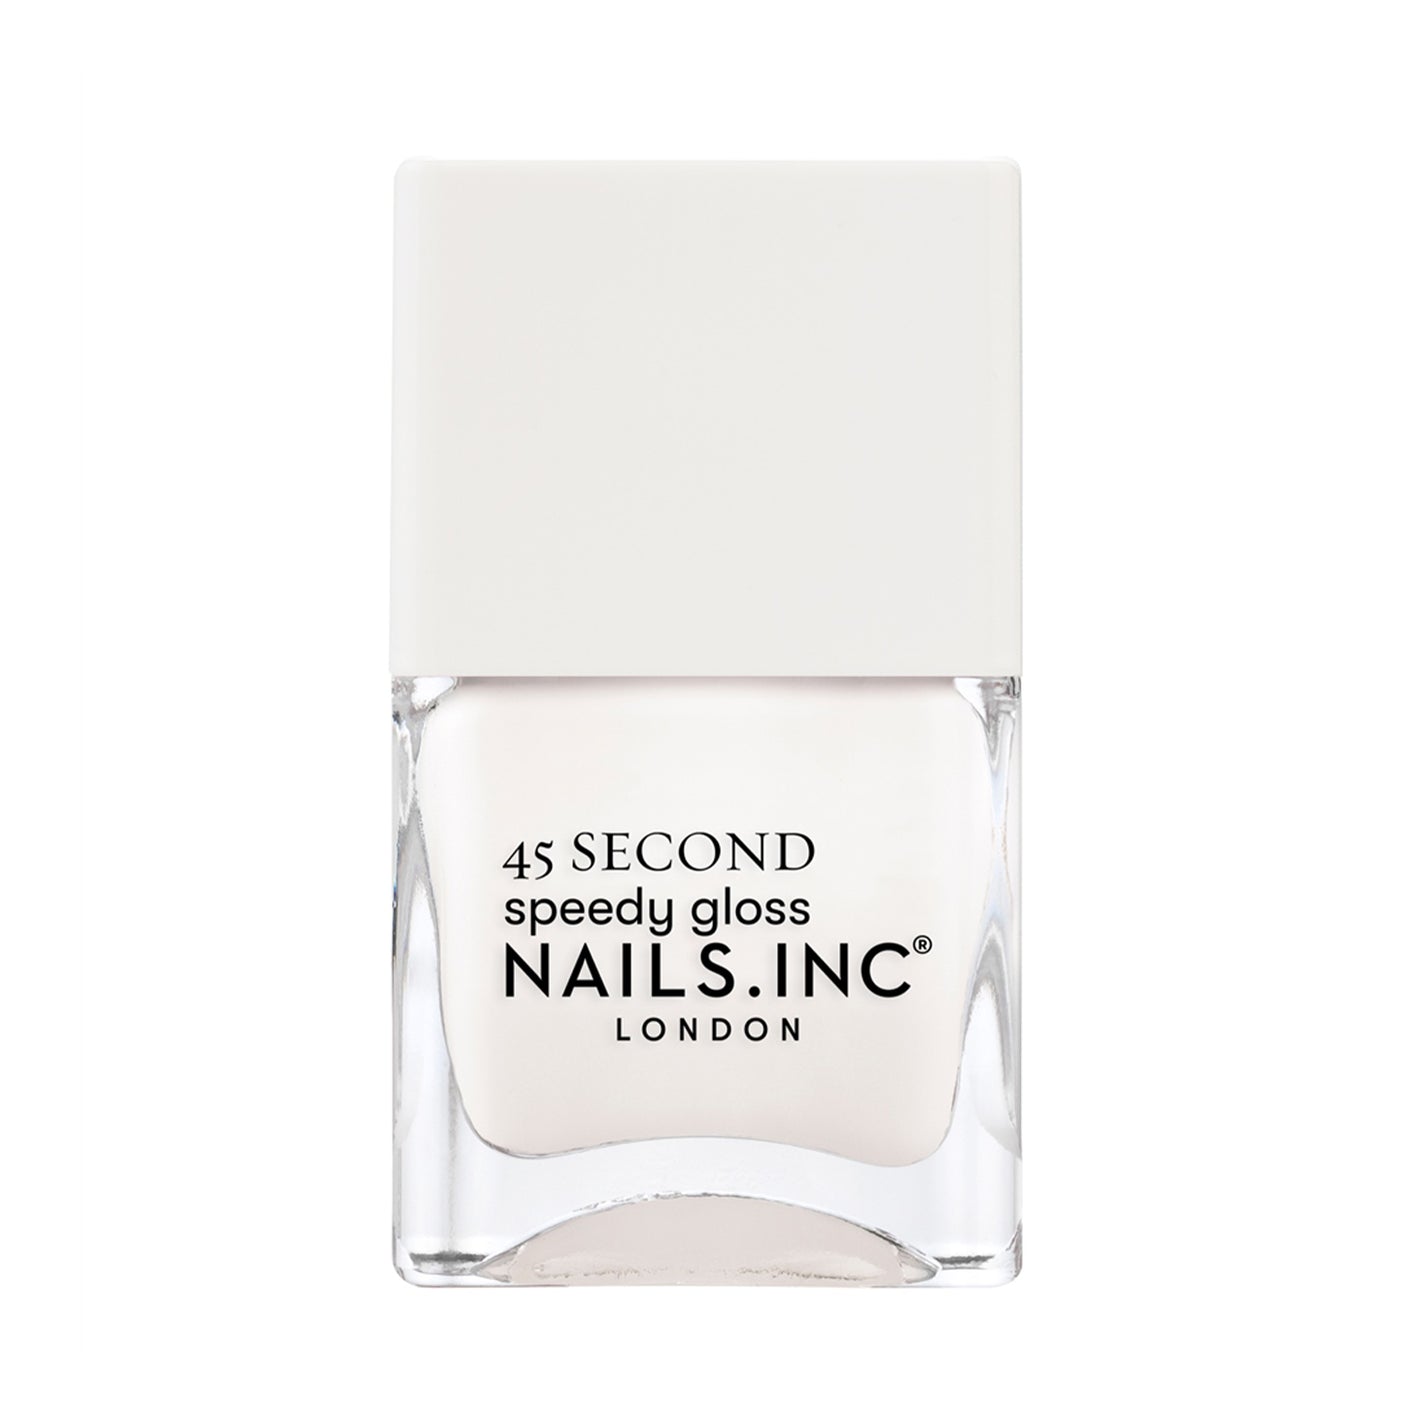 Nails.INC 45 Sec Speedy Gloss - Find Me In Fulham